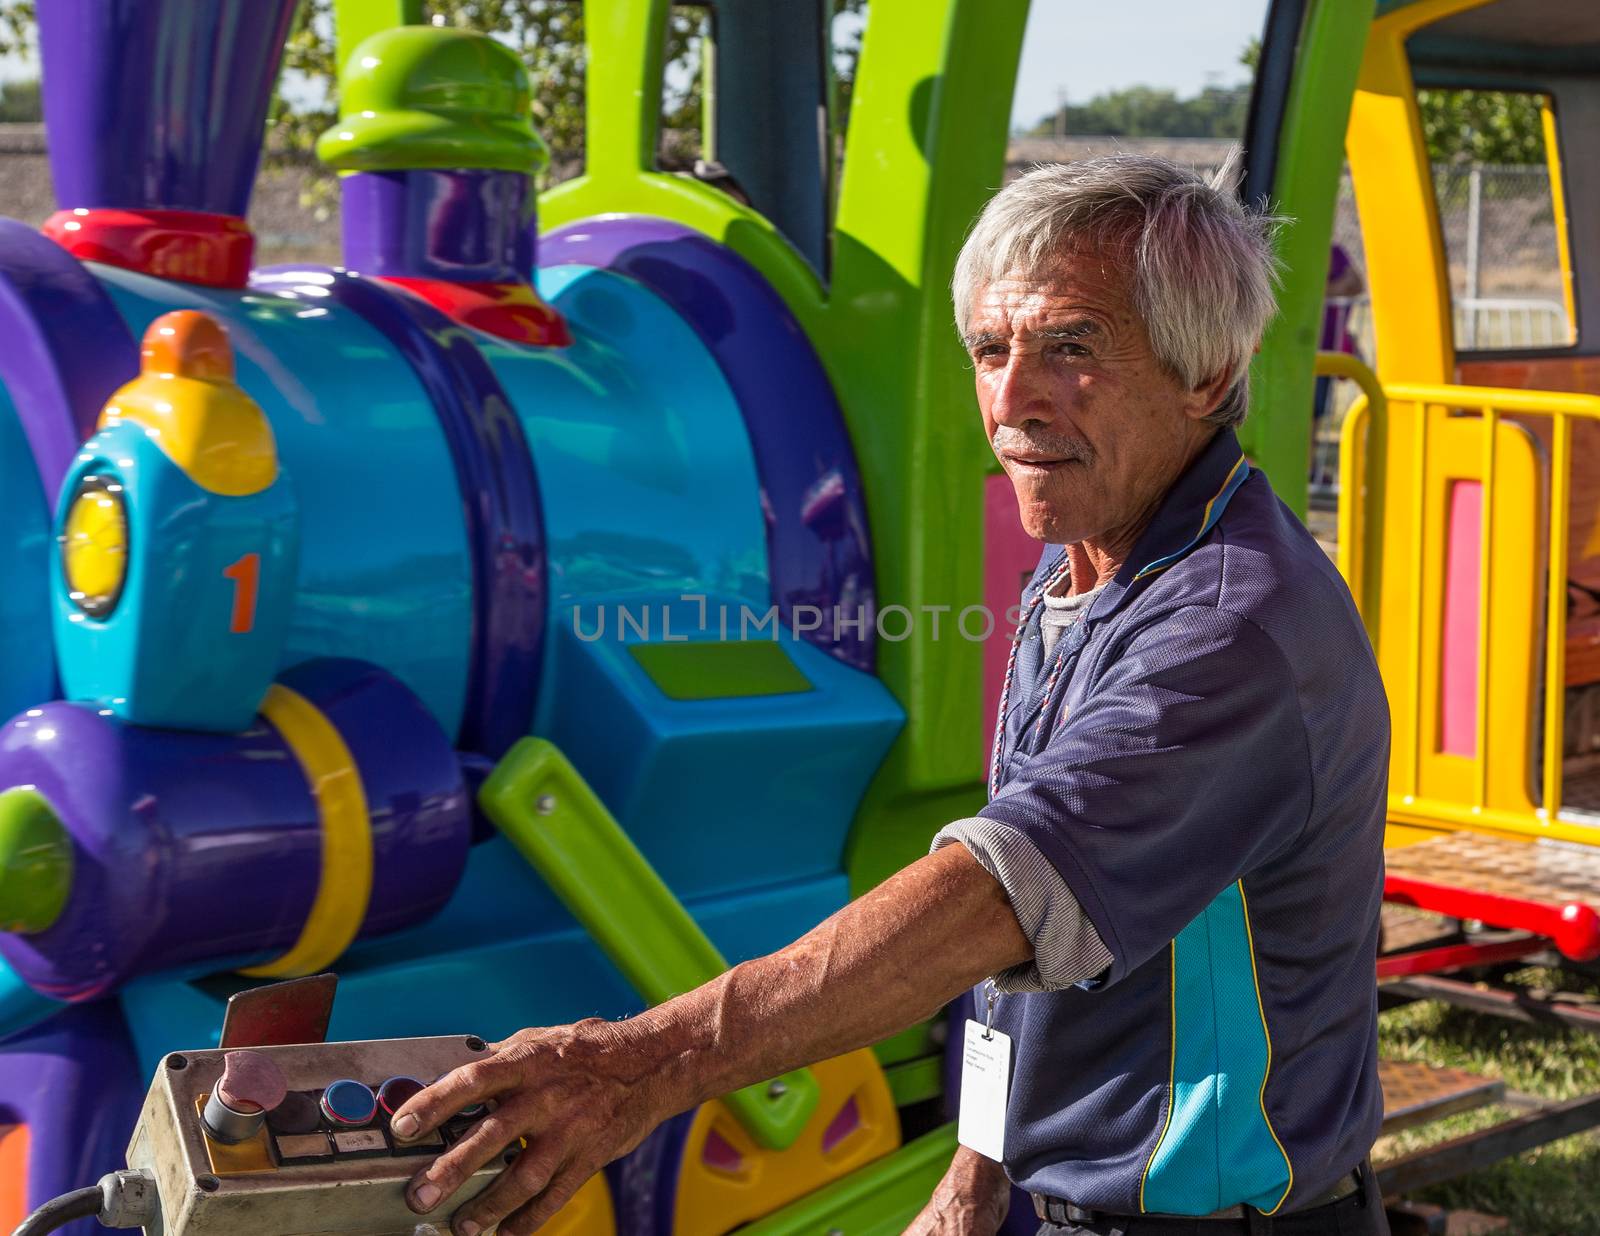 Anderson, California, USA- June 17, 2015: A carnival train employee operates equipment that drives a toy train with children at the Shasta County fair.He operates the ride with the push button control at his fingertips.